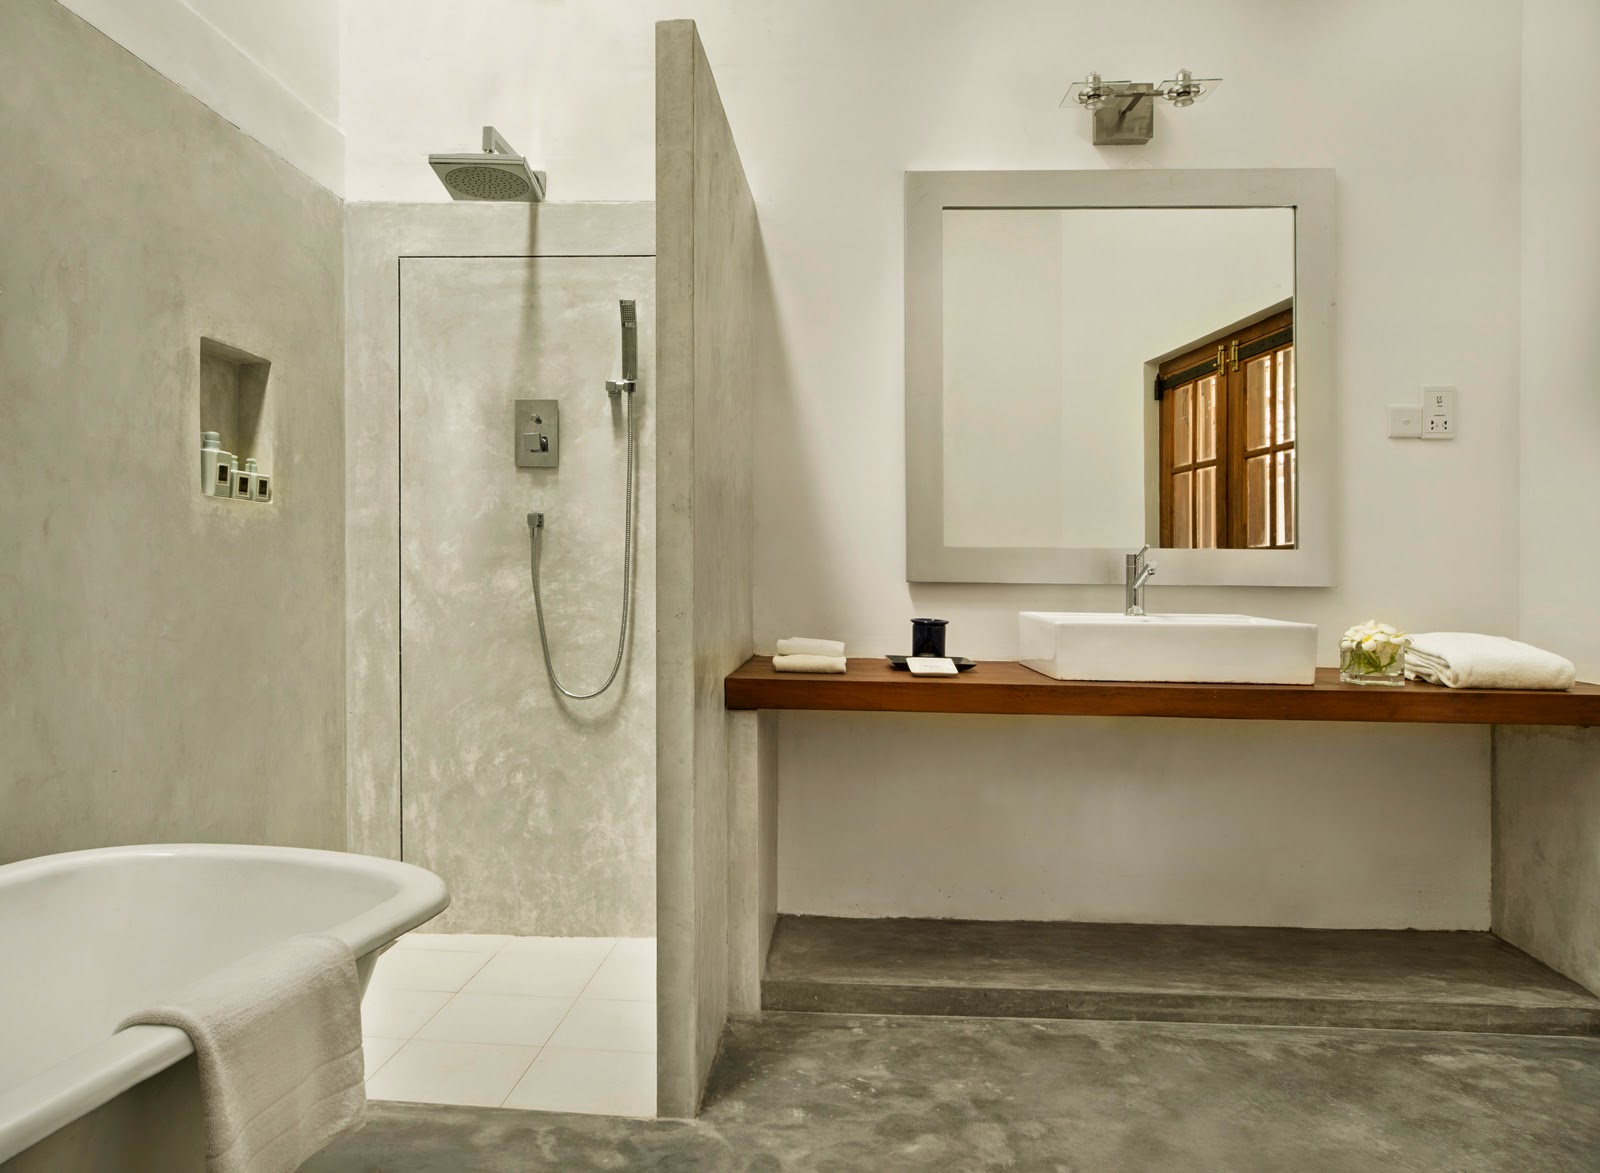 https://static.asianpaints.com/content/dam/asianpaintsbeautifulhomes/spaces/bathrooms/tips-for-a-minimal-bathroom/New-Wing-bathroom-4-Image-courtesy-The-Fort-Printers-Galle.jpg